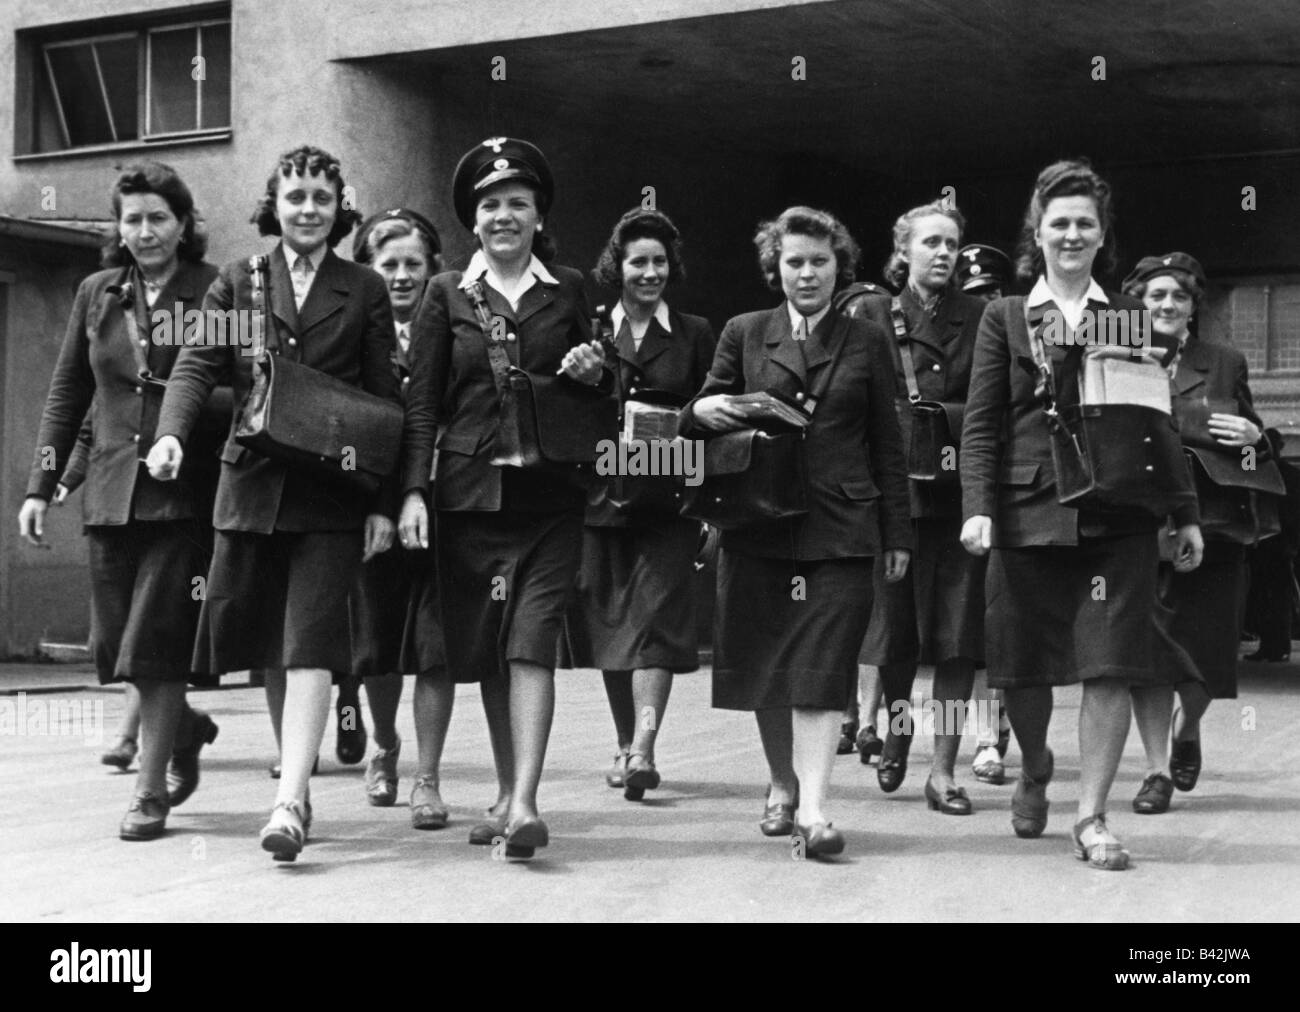 events, Second World War / WWII, Germany, women replacing men enlisted in the army, postwomen, group picture, 1942 / 1943, Stock Photo